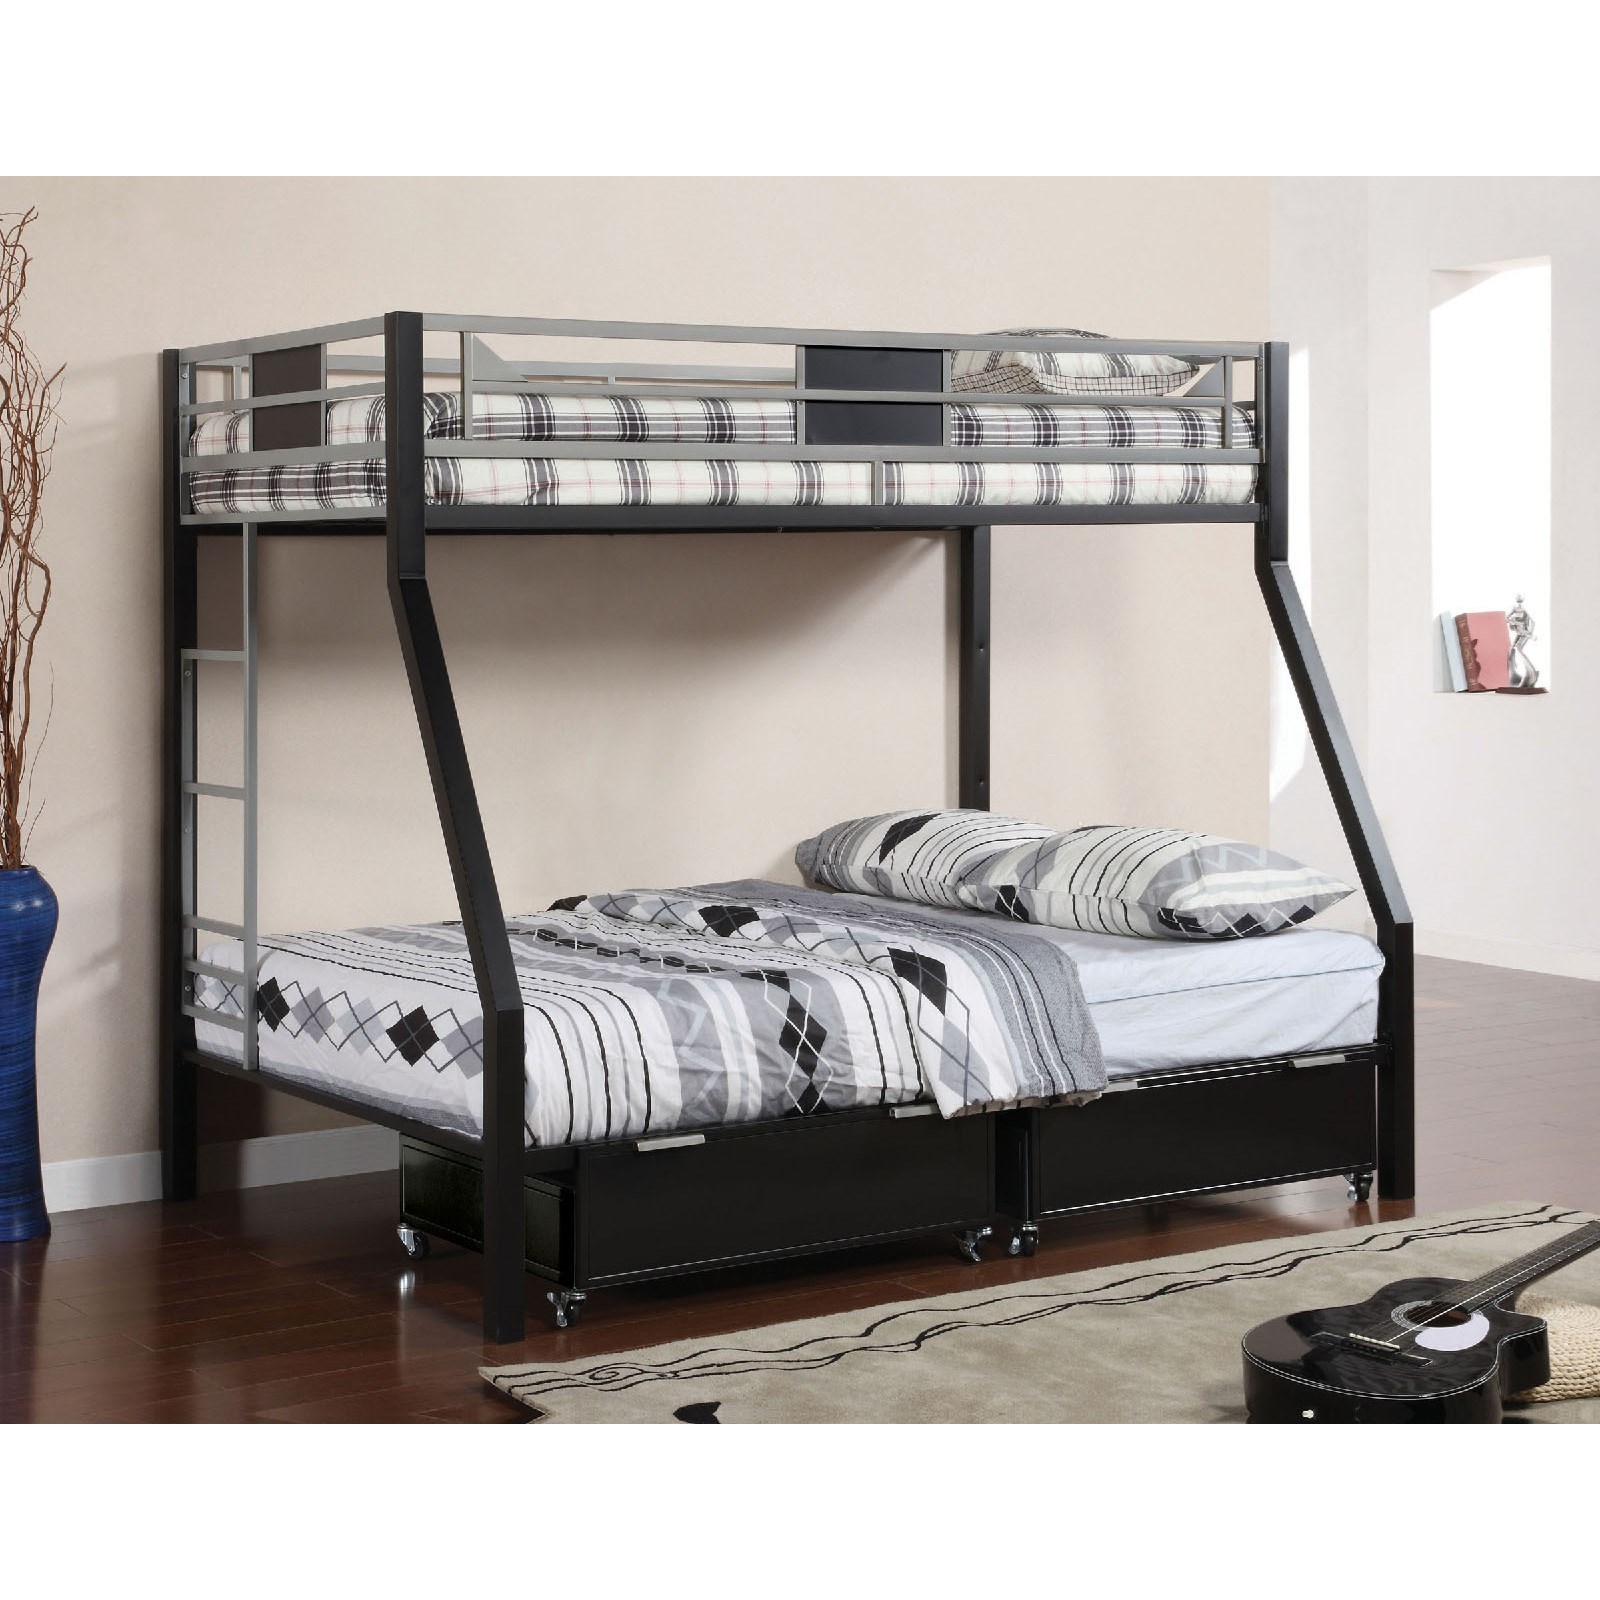 low profile bunk beds twin over full